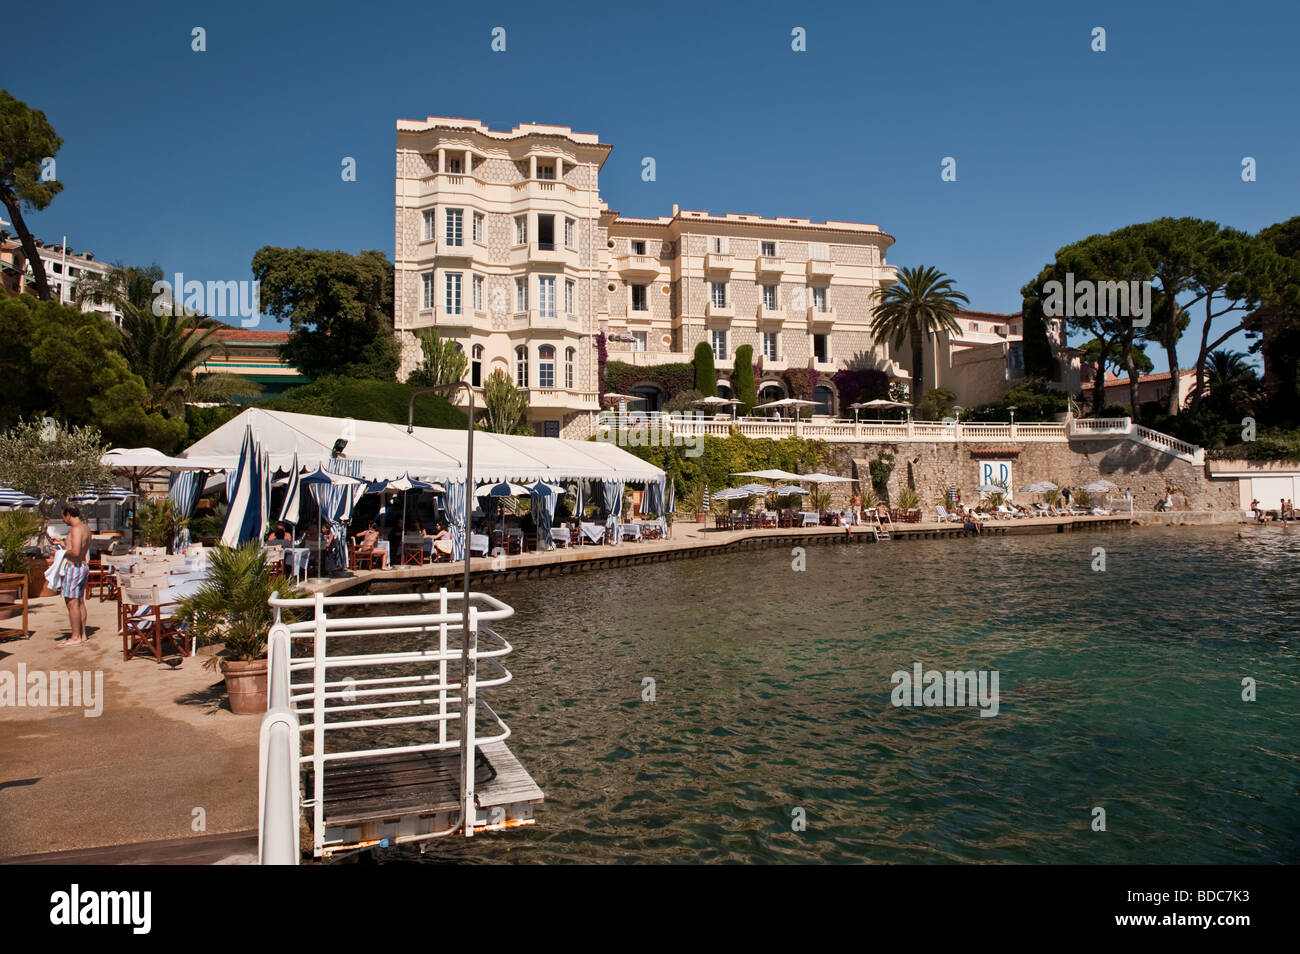 Belles Rives Hotel from the sun bathing jetty Stock Photo